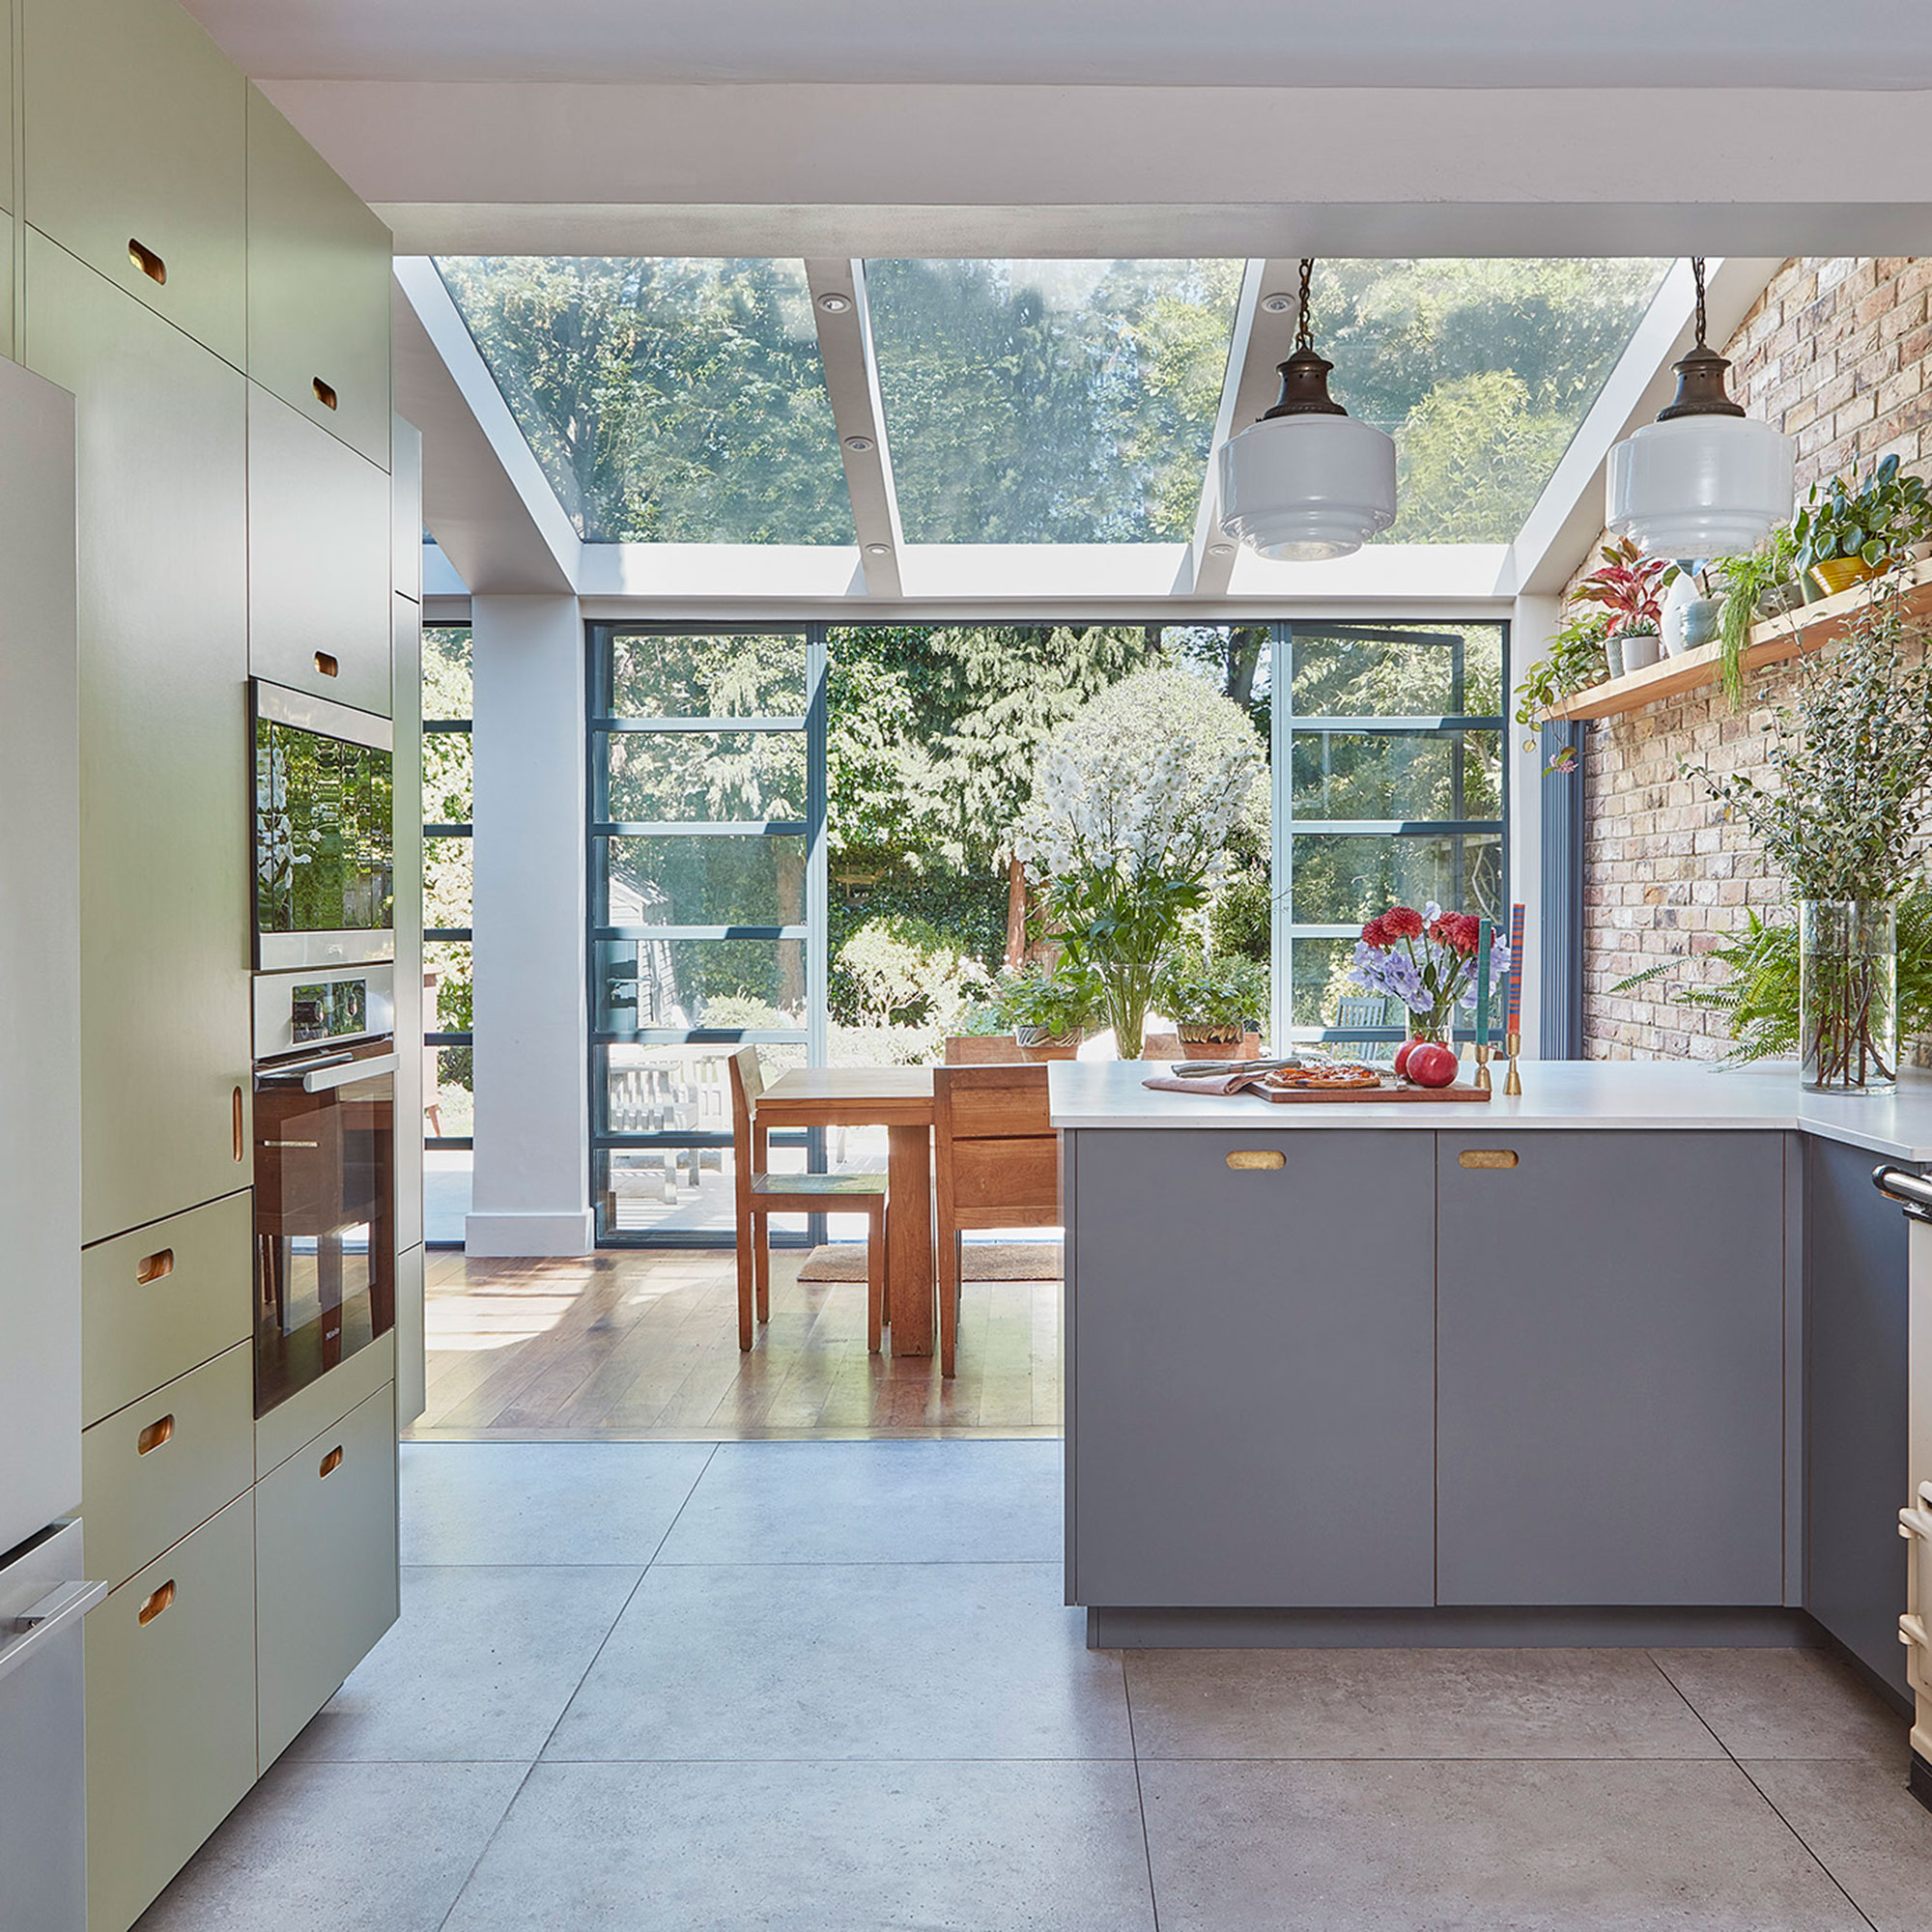 Kitchen with skylight, bifold doors, green cabinets and wooden dining table